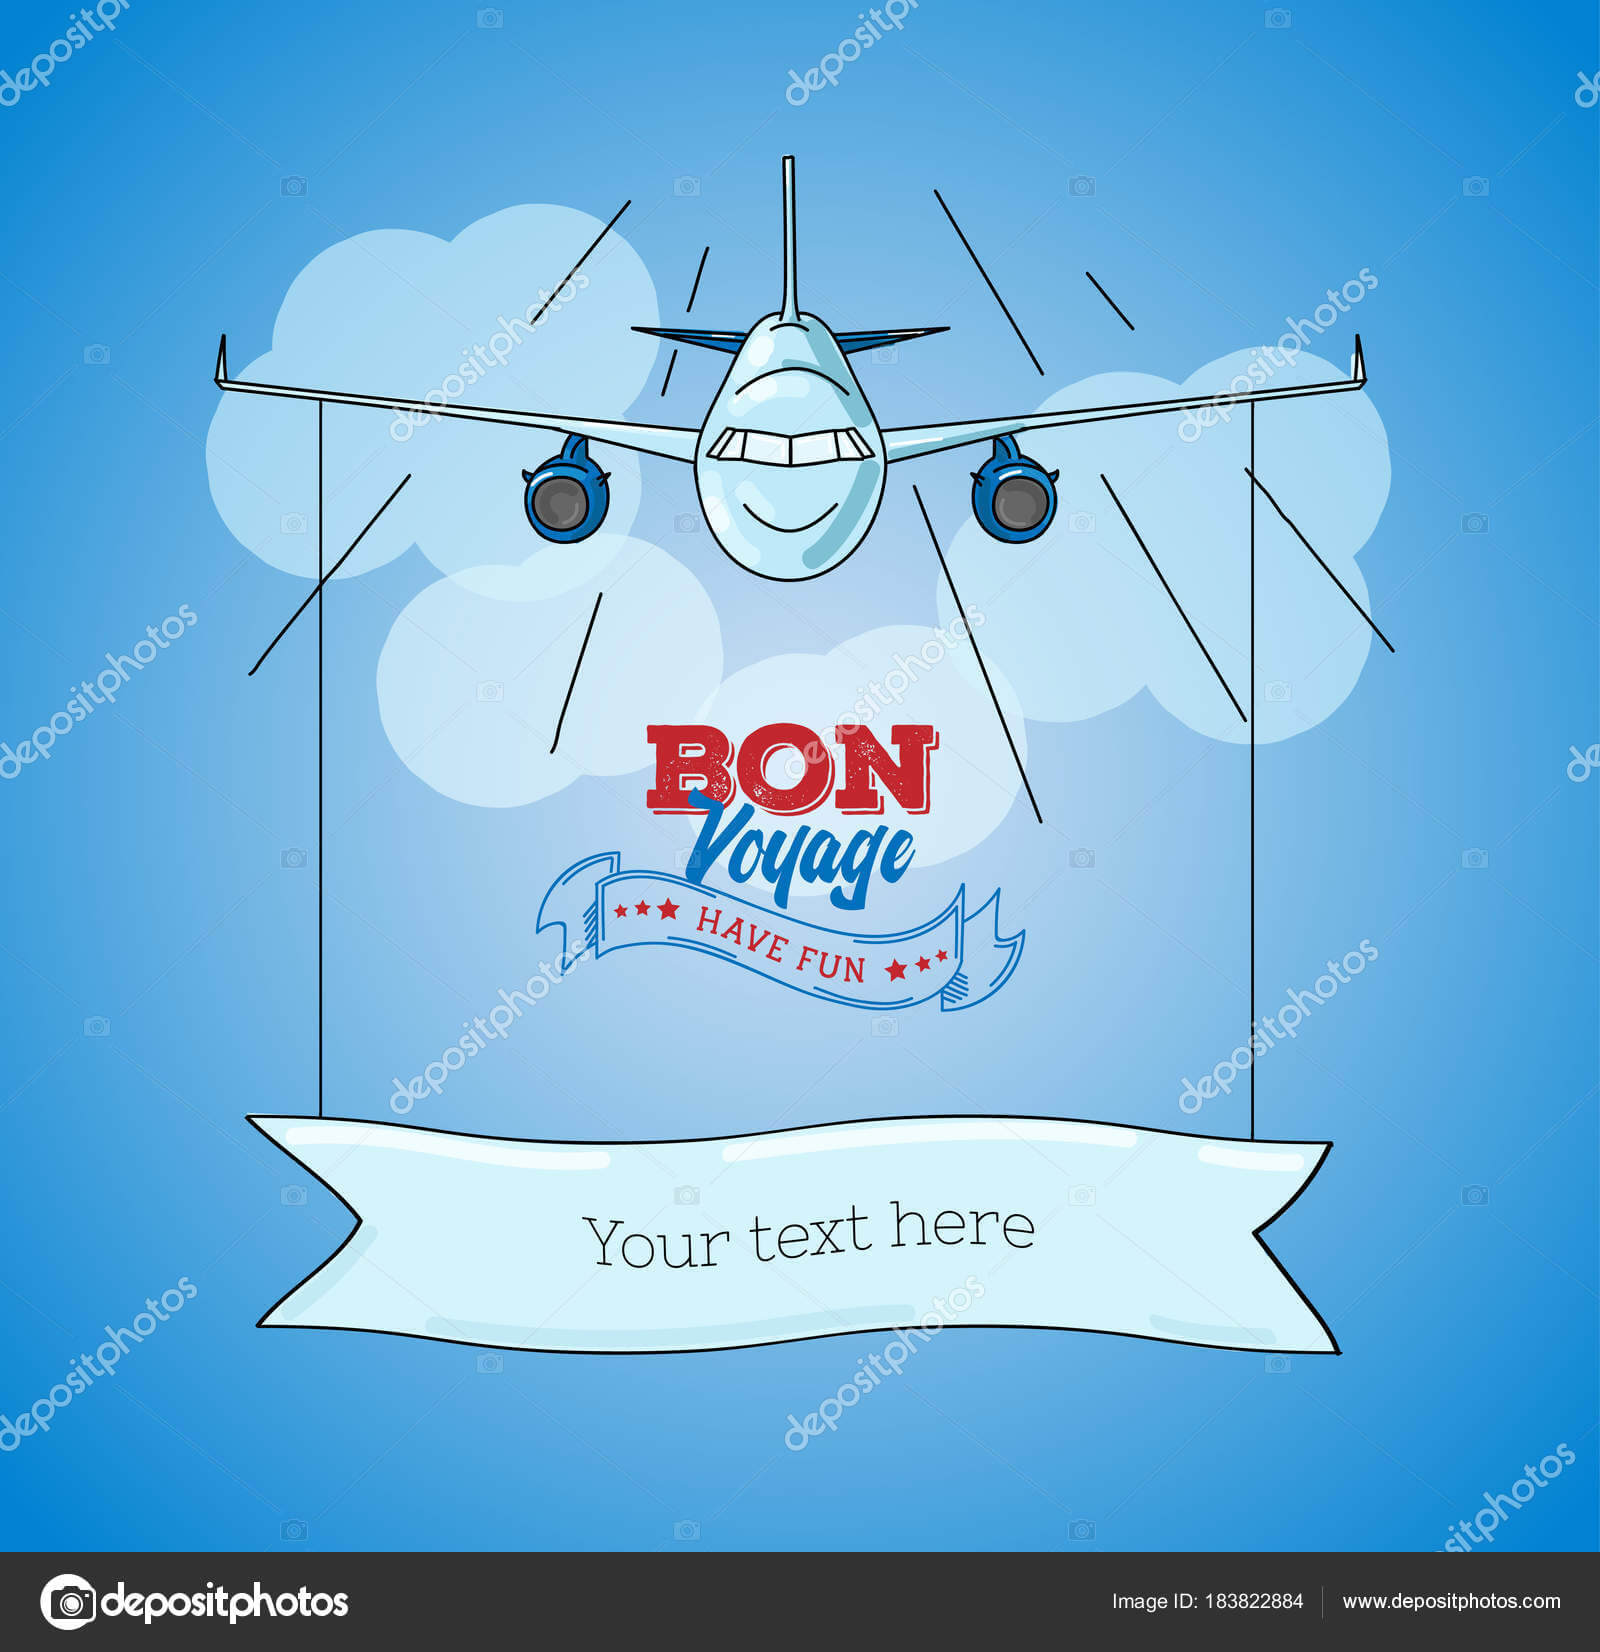 Card Template With Plane Graphic Illustration On Blue Sky For Bon Voyage Card Template